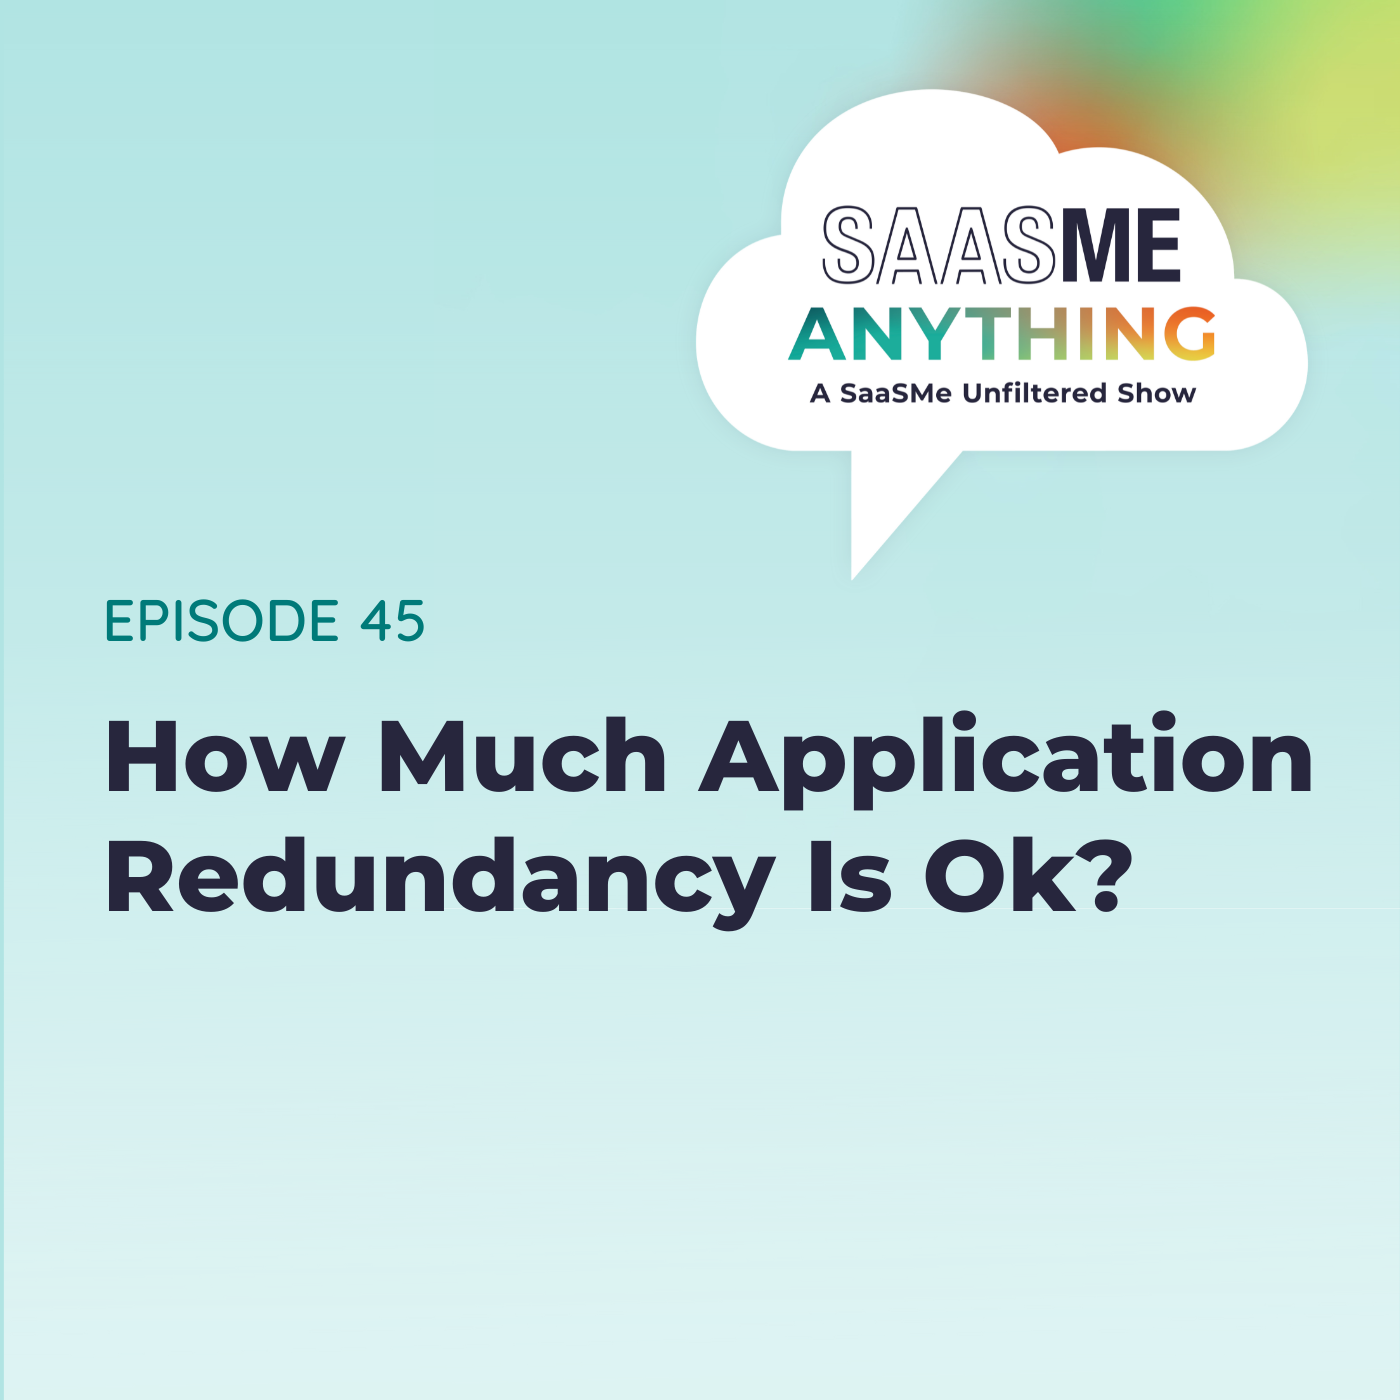 How Much Application Redundancy Is Ok?